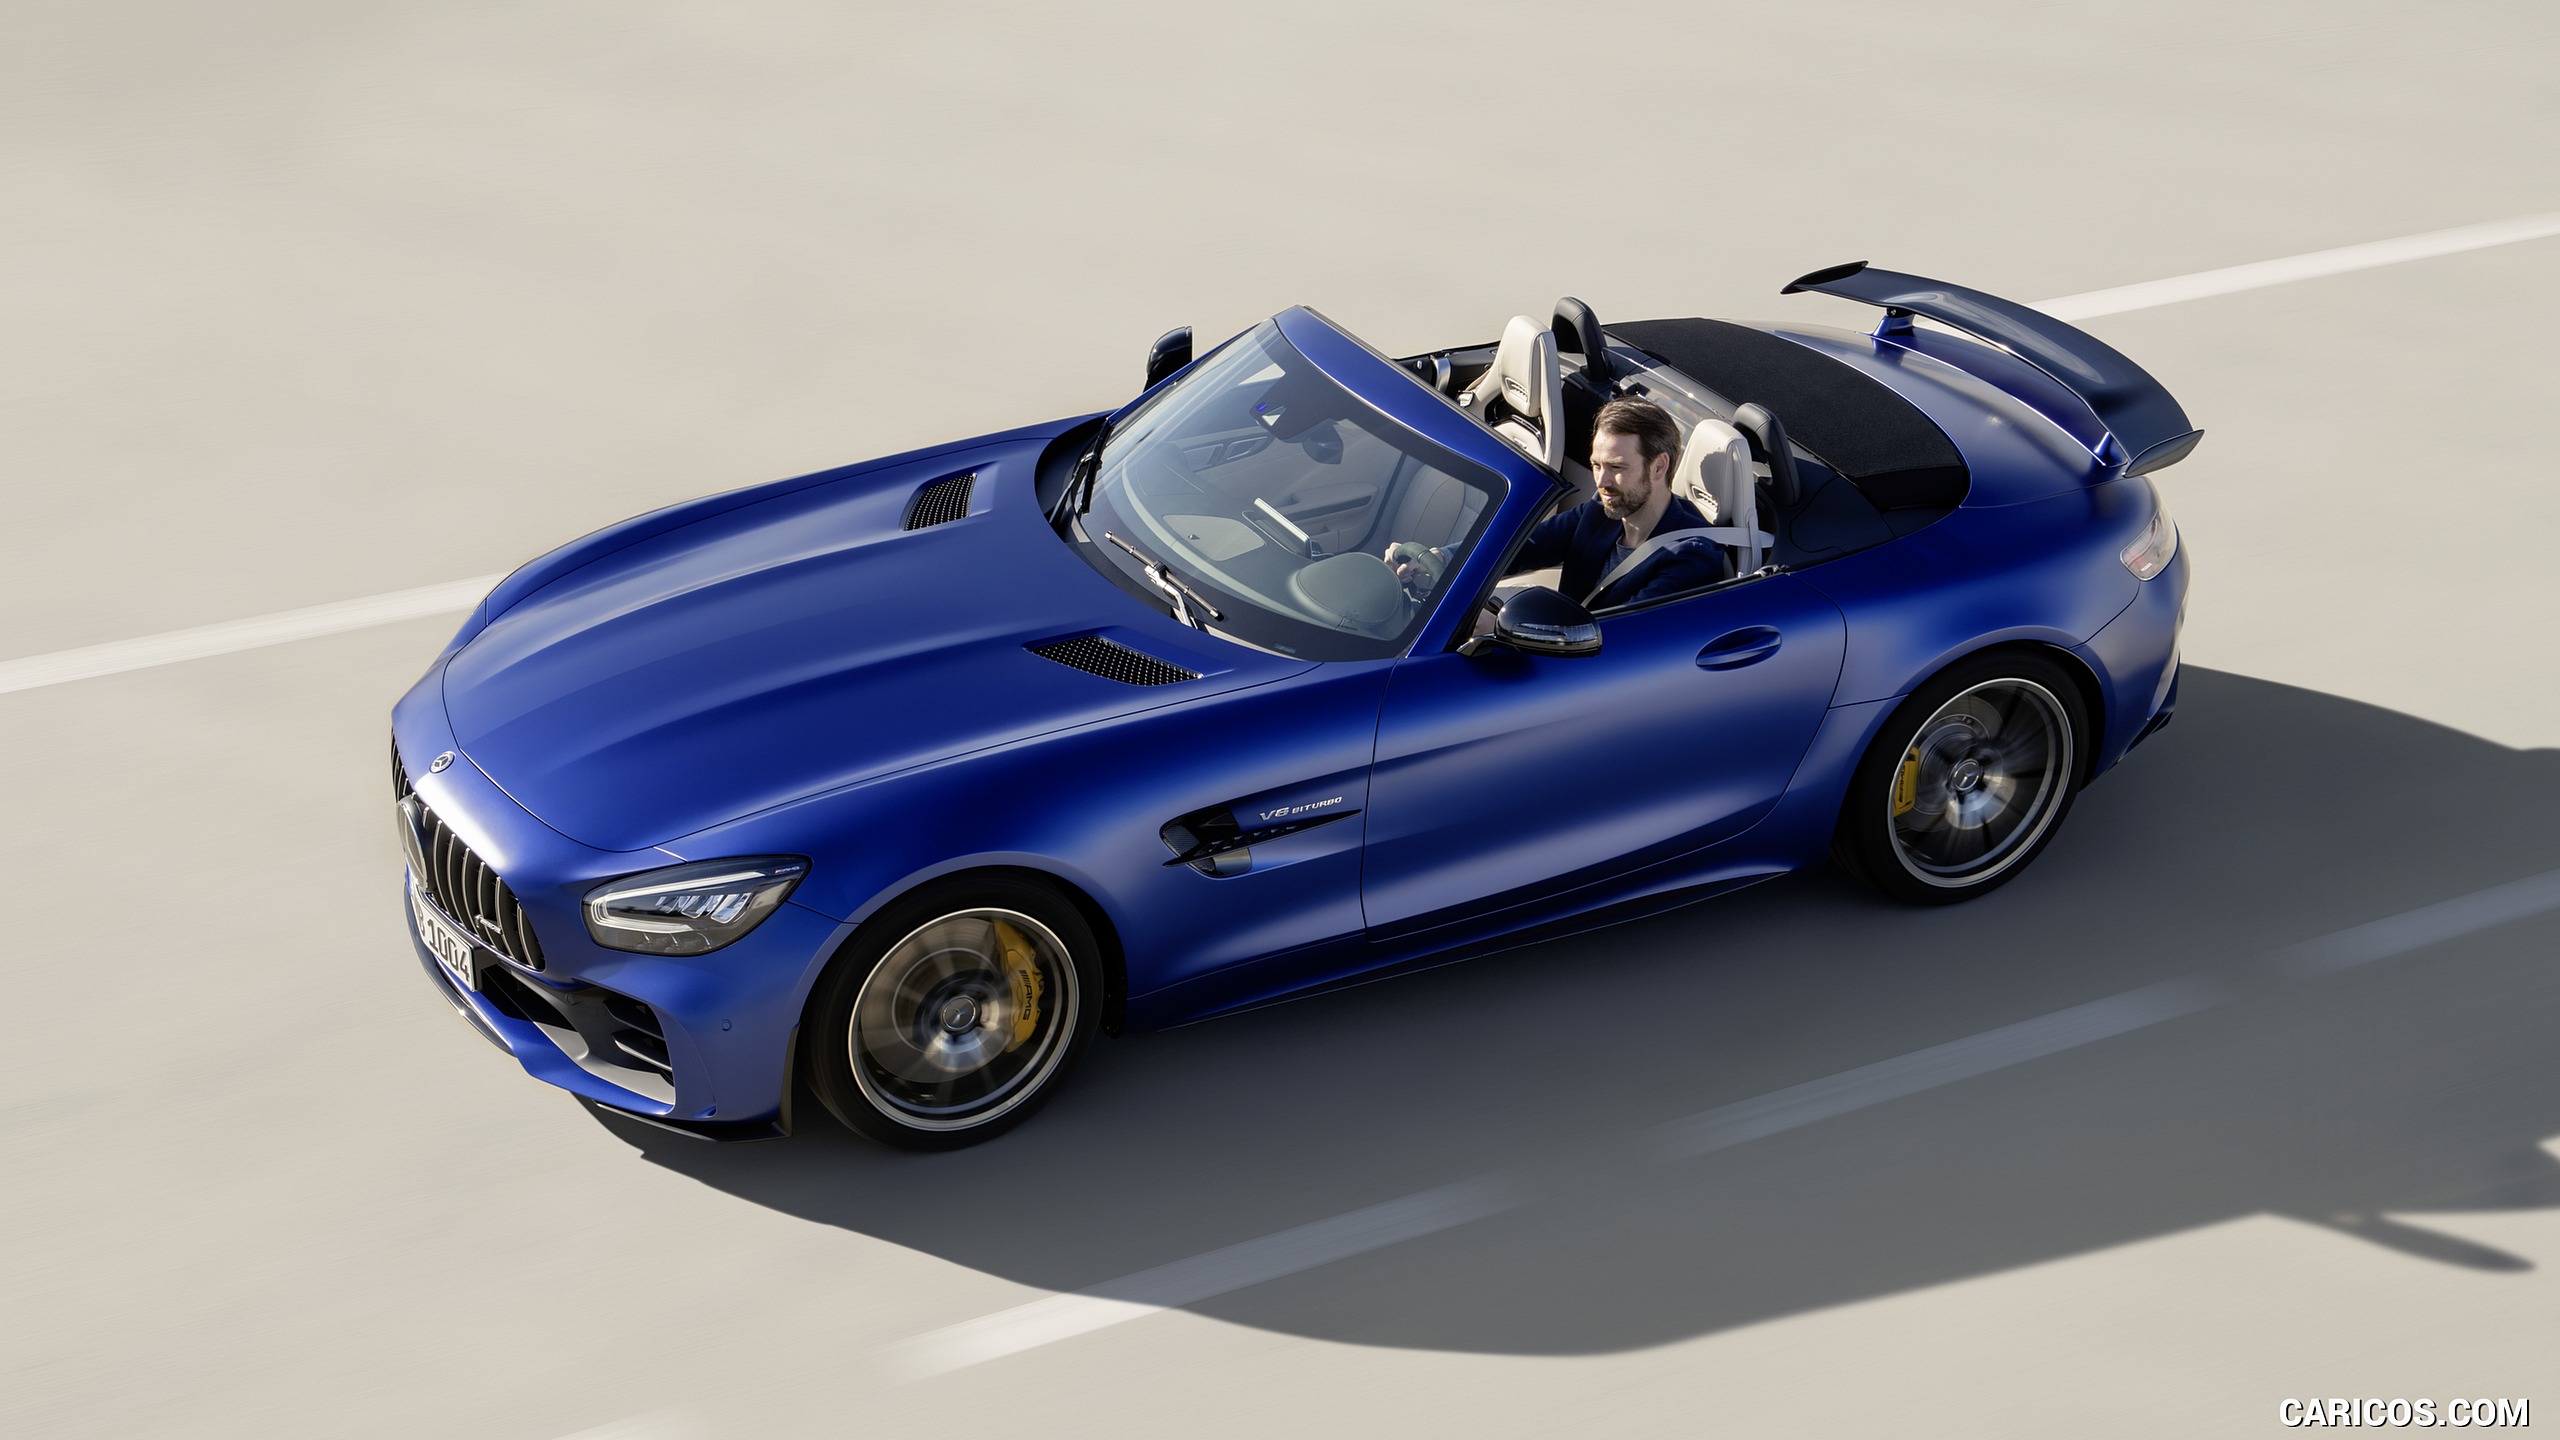 2020 Mercedes-AMG GT R Roadster - Front Three-Quarter, #10 of 246